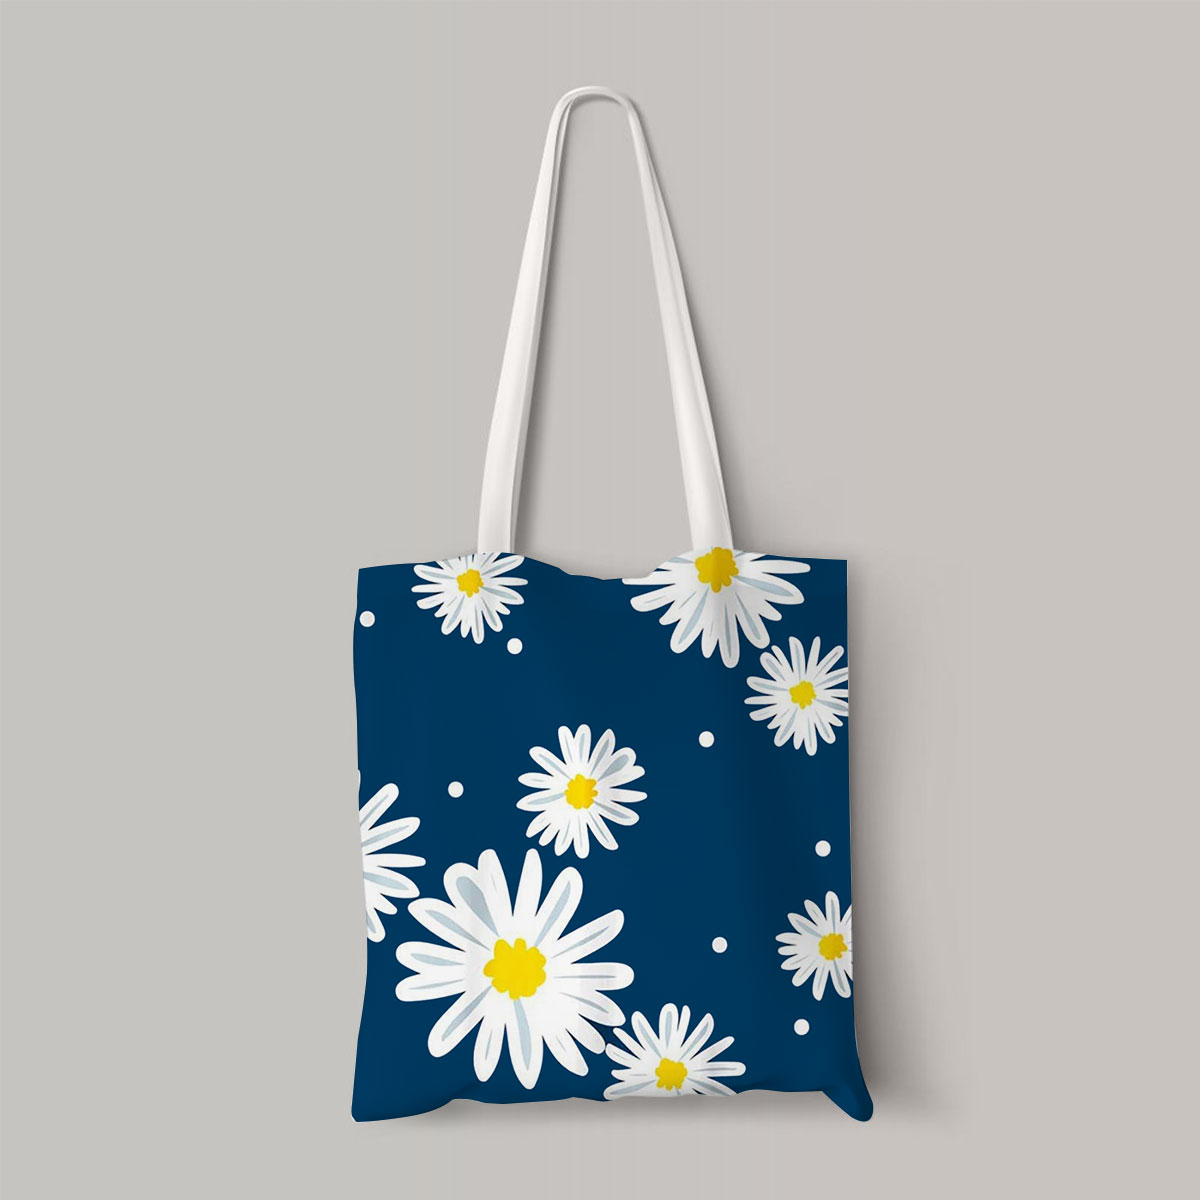 Abstract Daisy With Blue Totebag